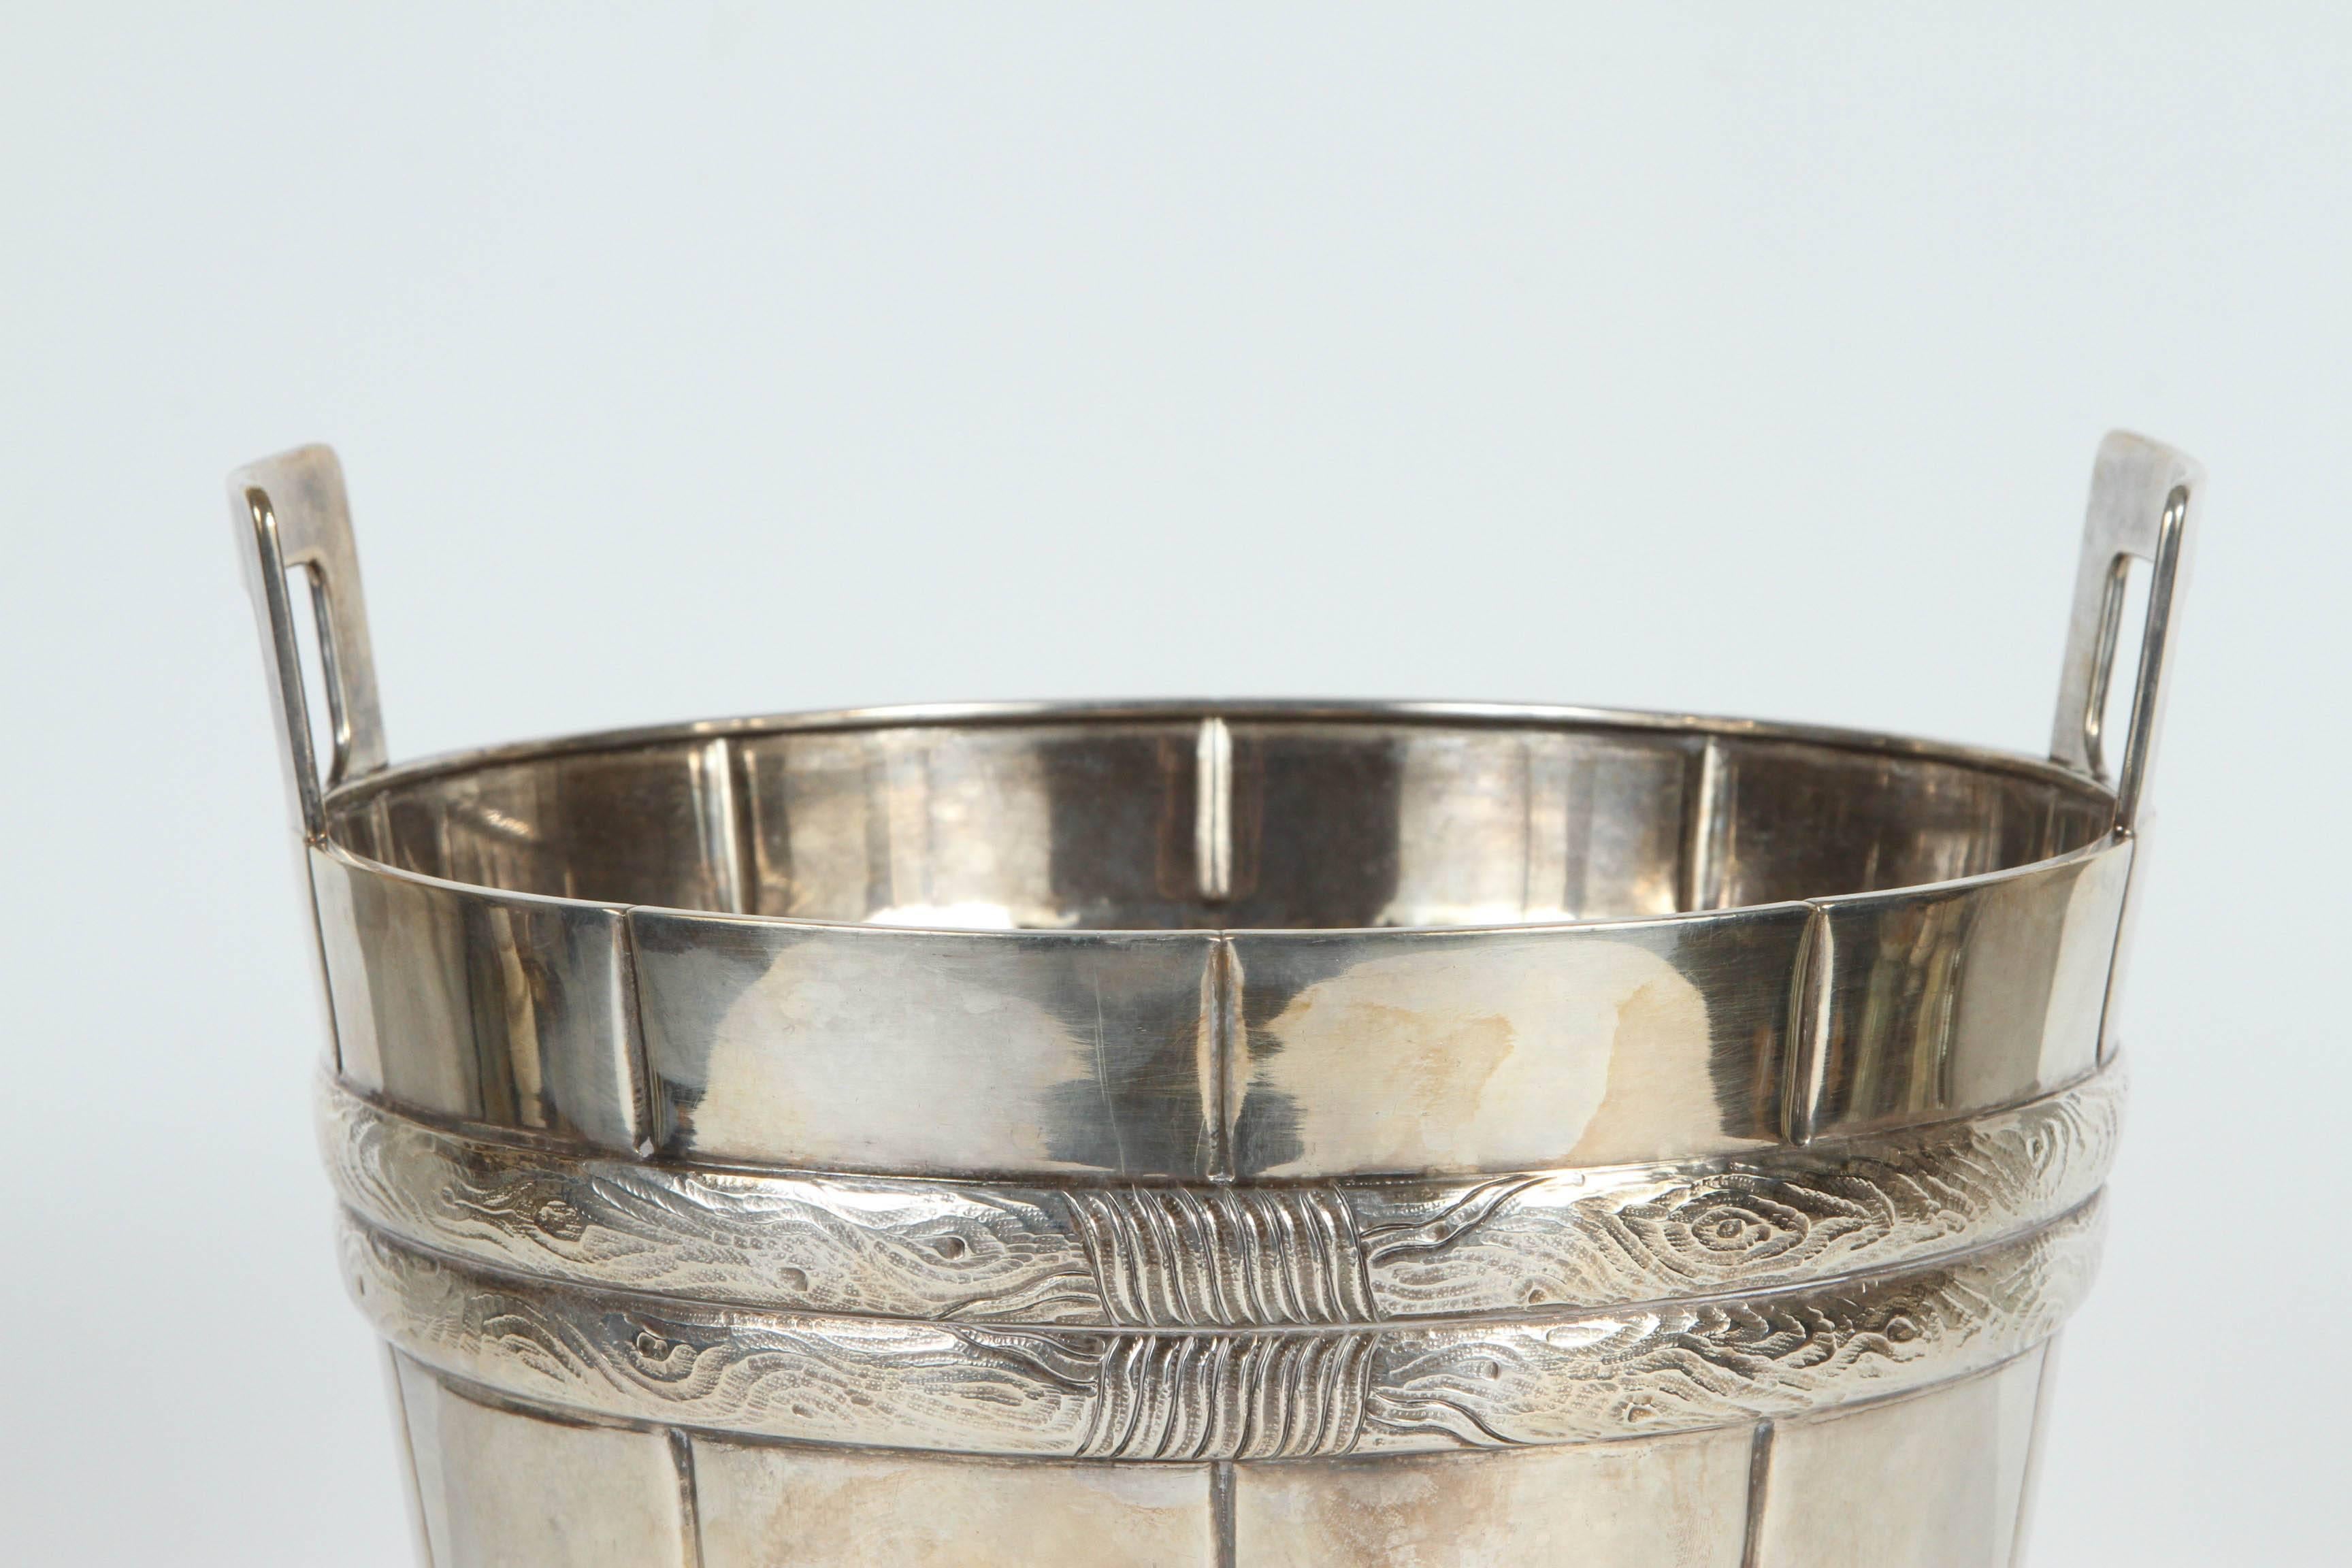 1940s-1950s single bucket motif sterling silver ice bucket with handles. The base diameter measurement is 6.75 inches. Signed Tiffany and Co.